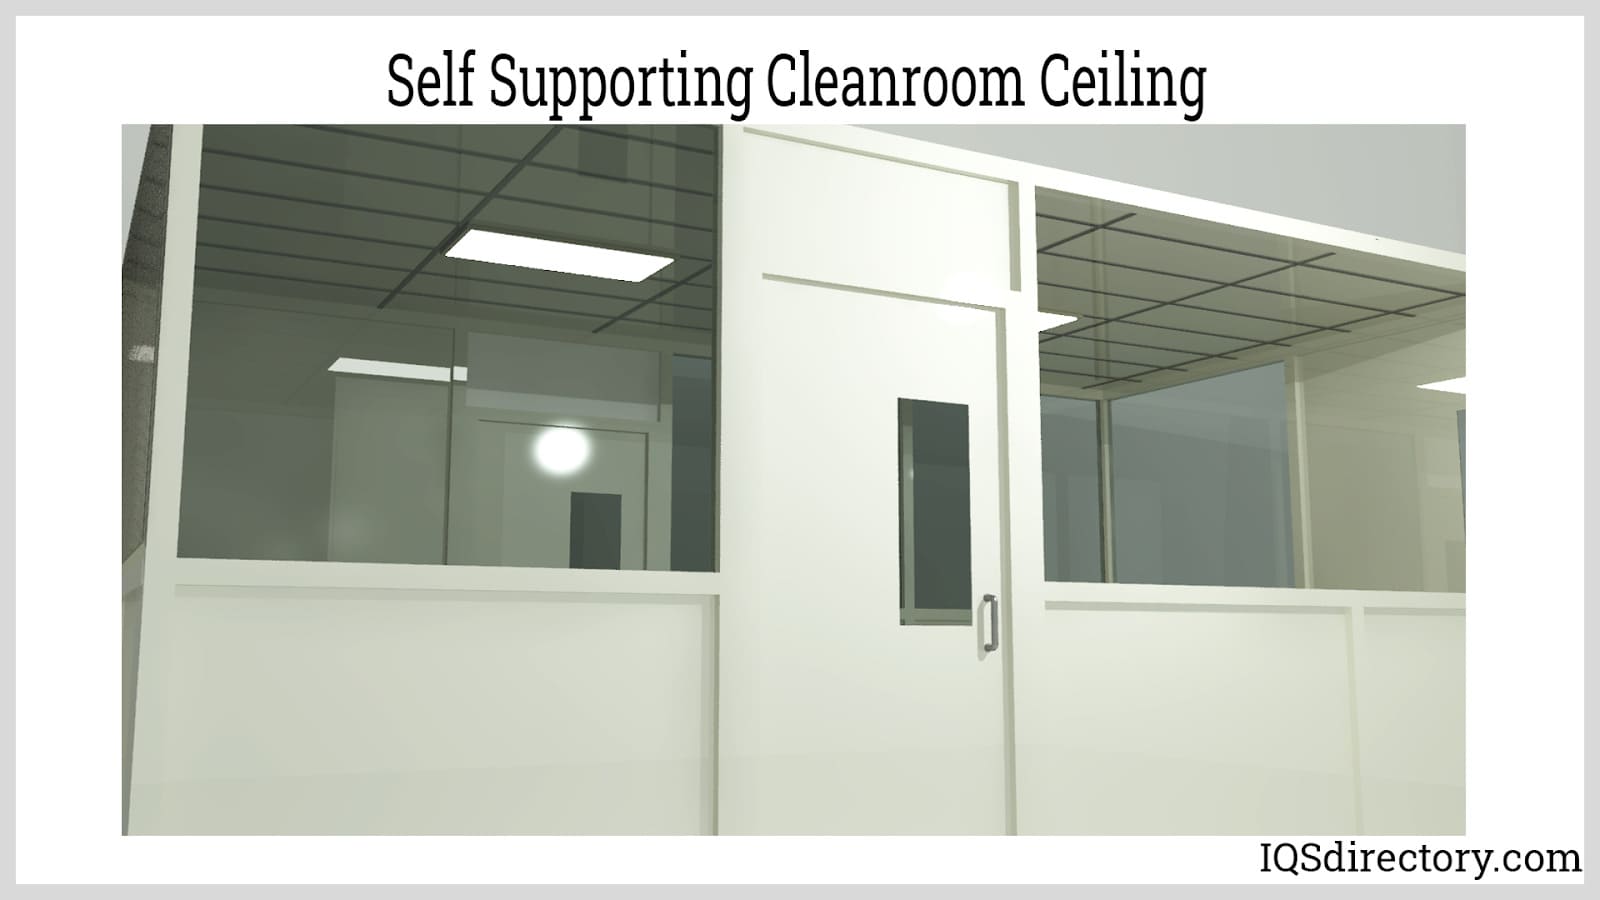 Self Supporting Cleanroom Ceiling